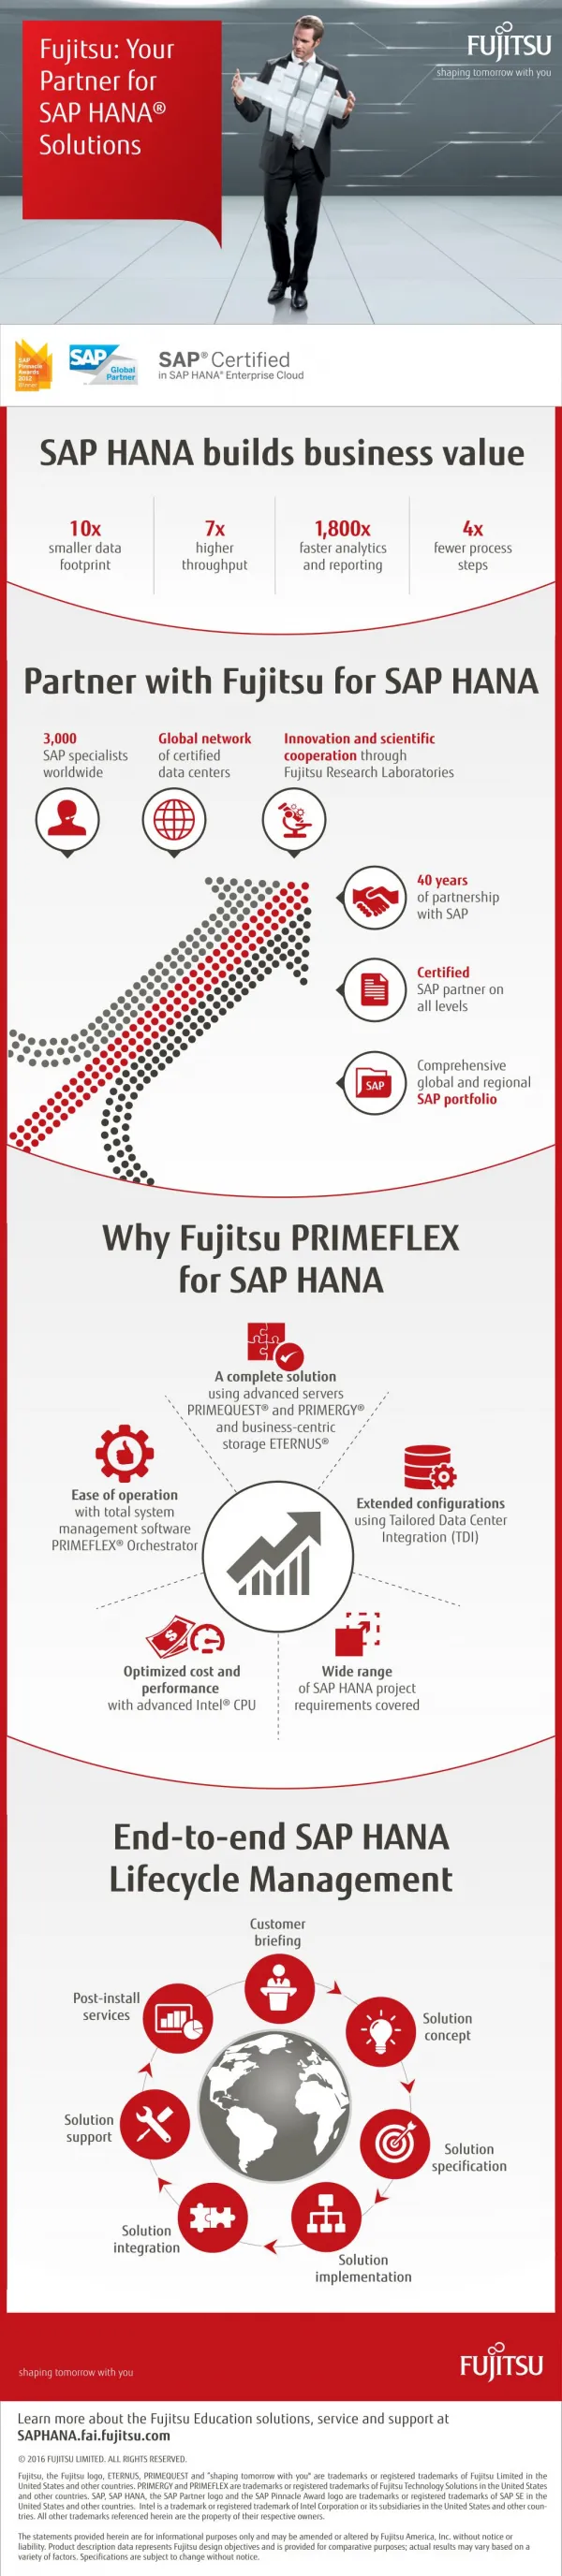 Best End-to-End Solutions with PRIMEFLEX® for SAP HANA